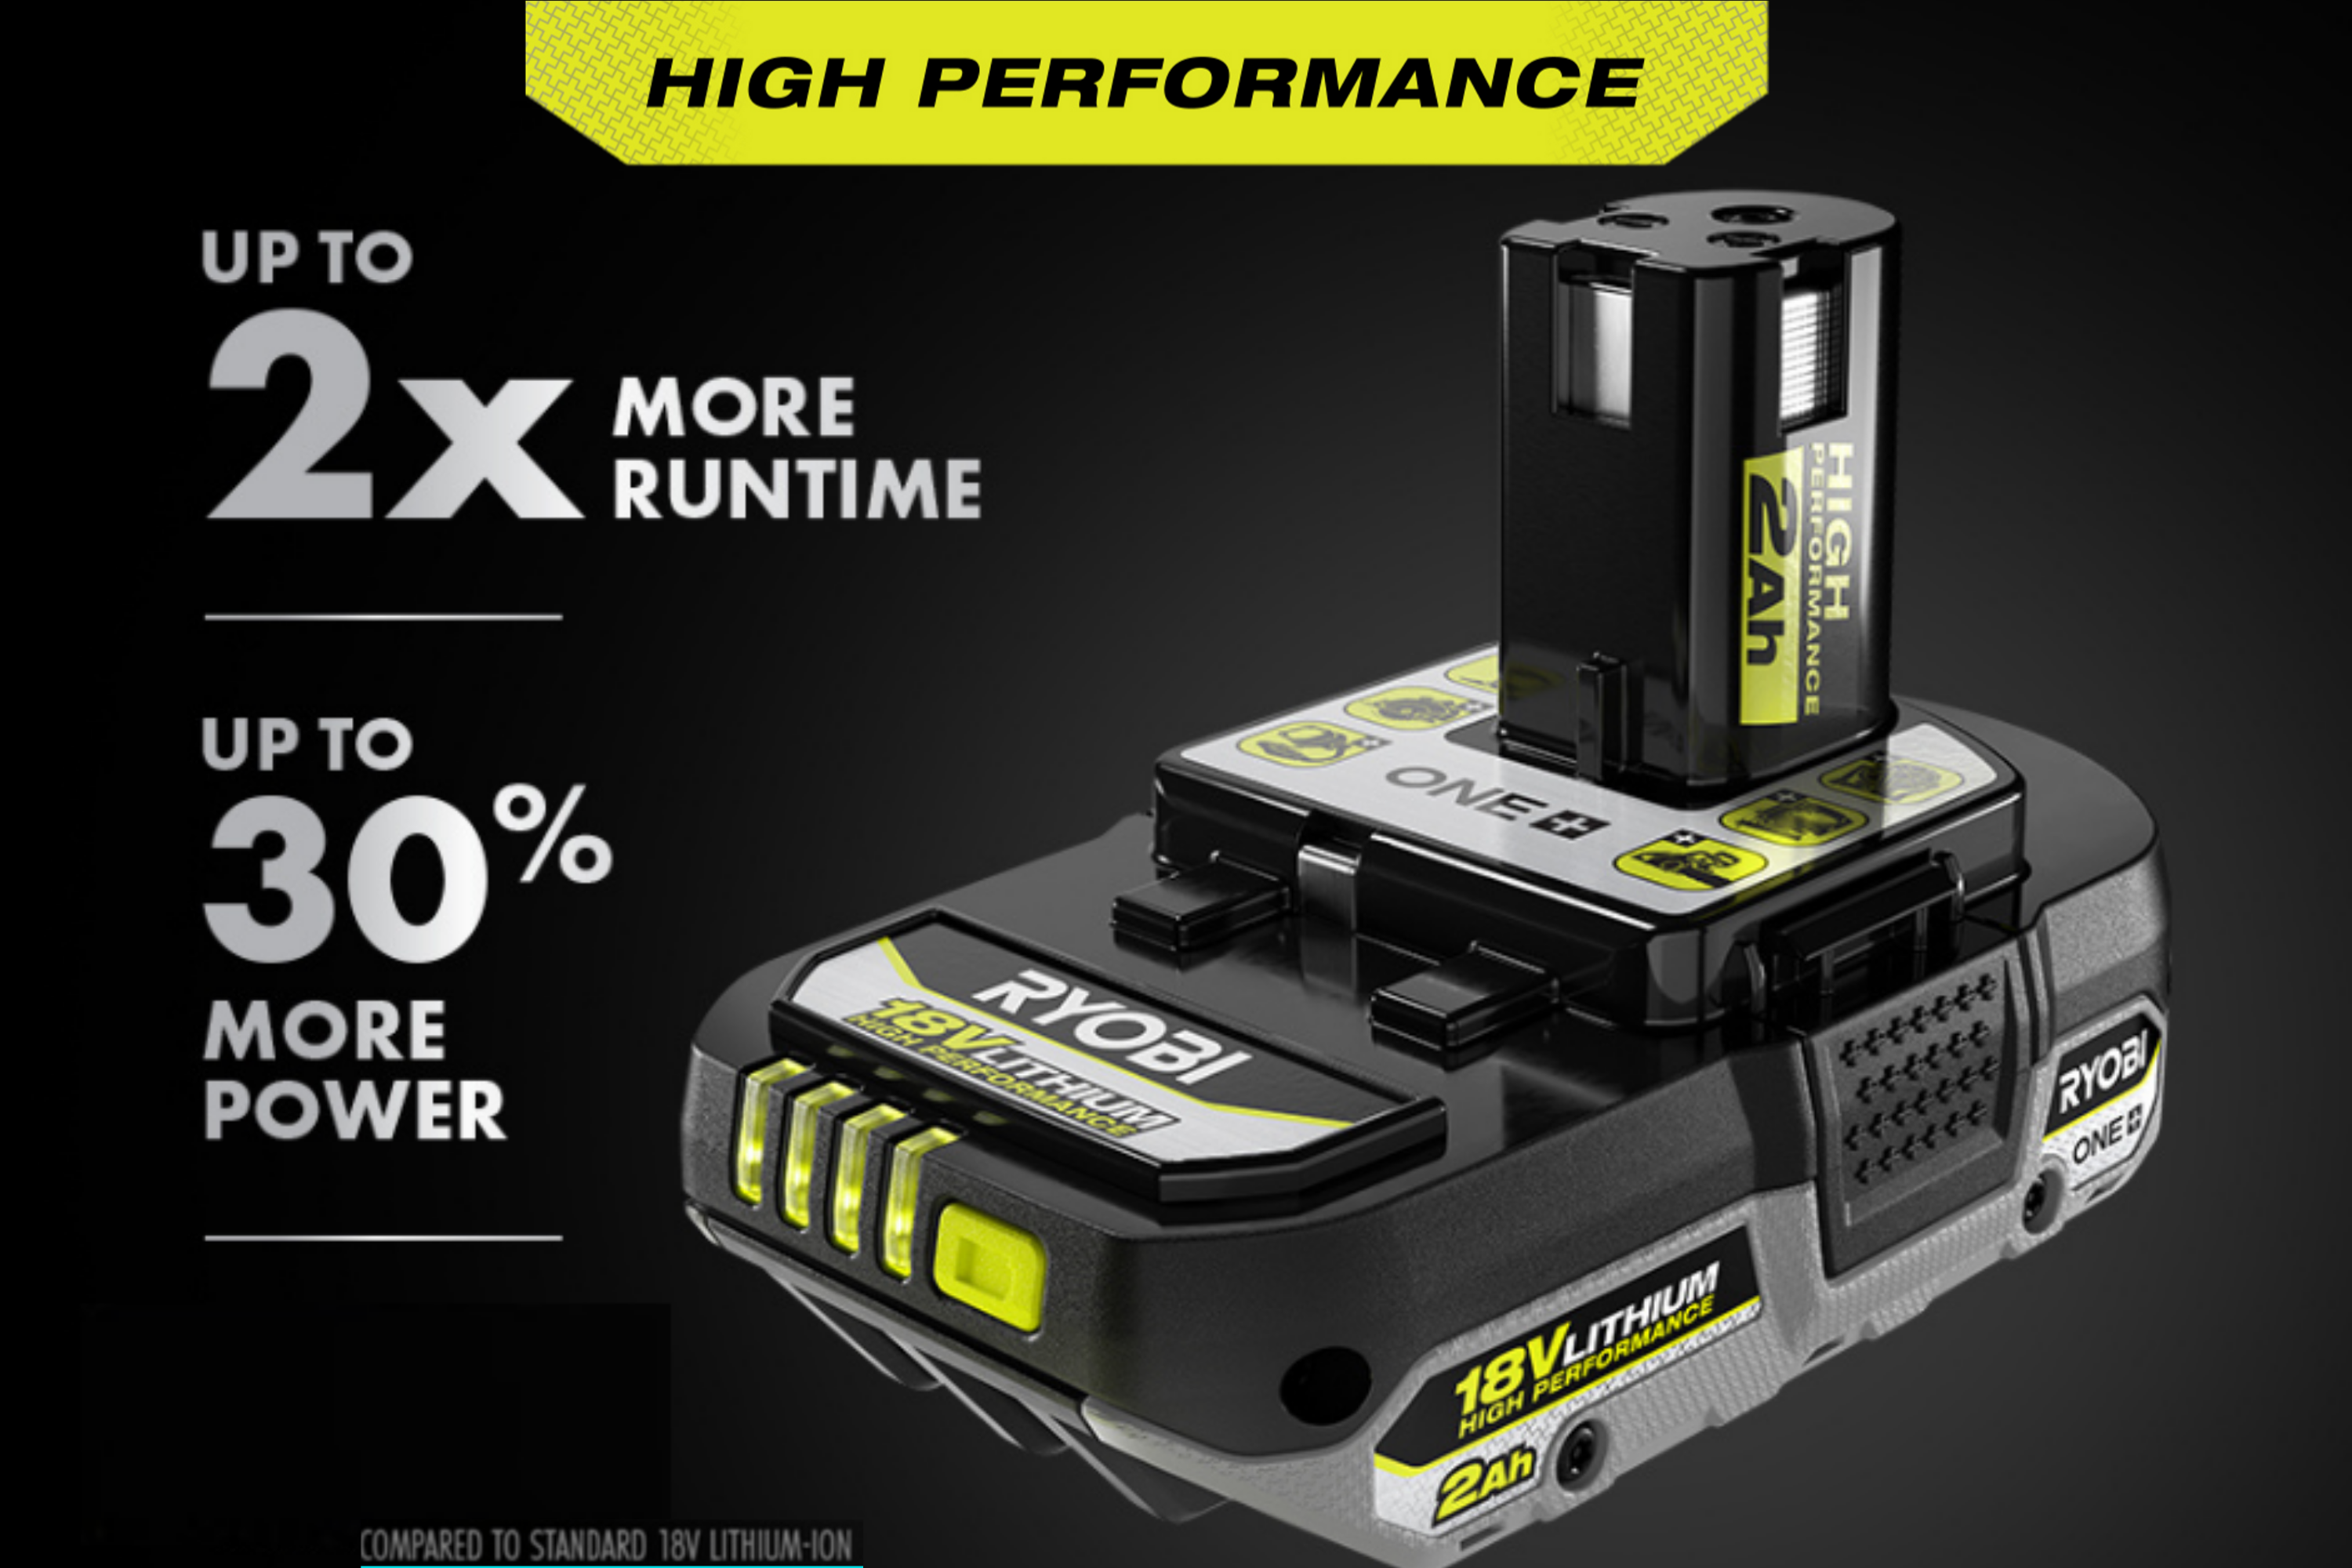 Product Features Image for 18V ONE+ 2.0 AH COMPACT HIGH PERFORMANCE BATTERY (2-PACK).